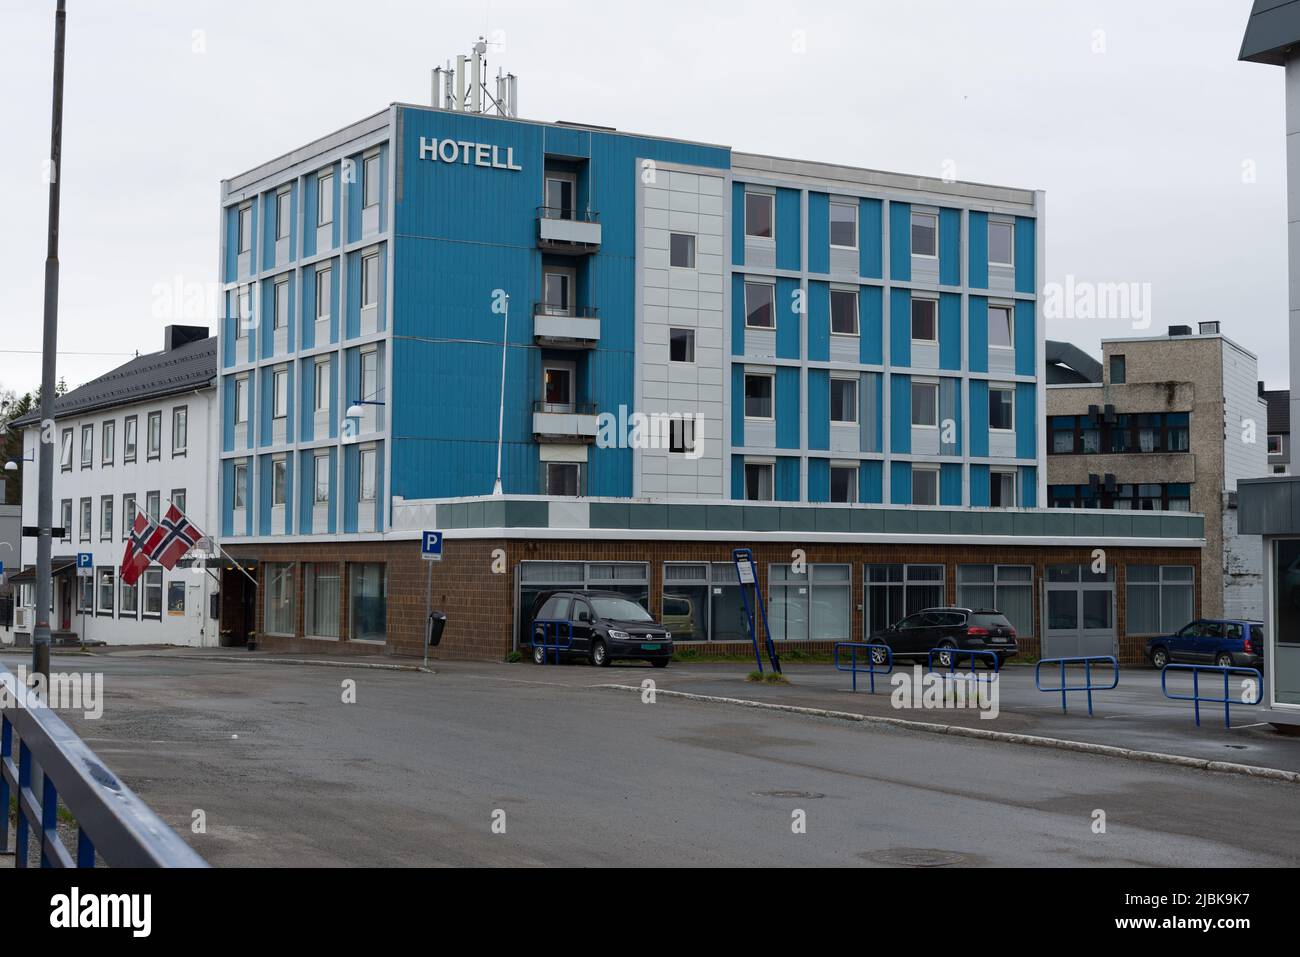 Hotel in Finnsnes, Troms, Norway. In a characteristic retro style. Stock Photo